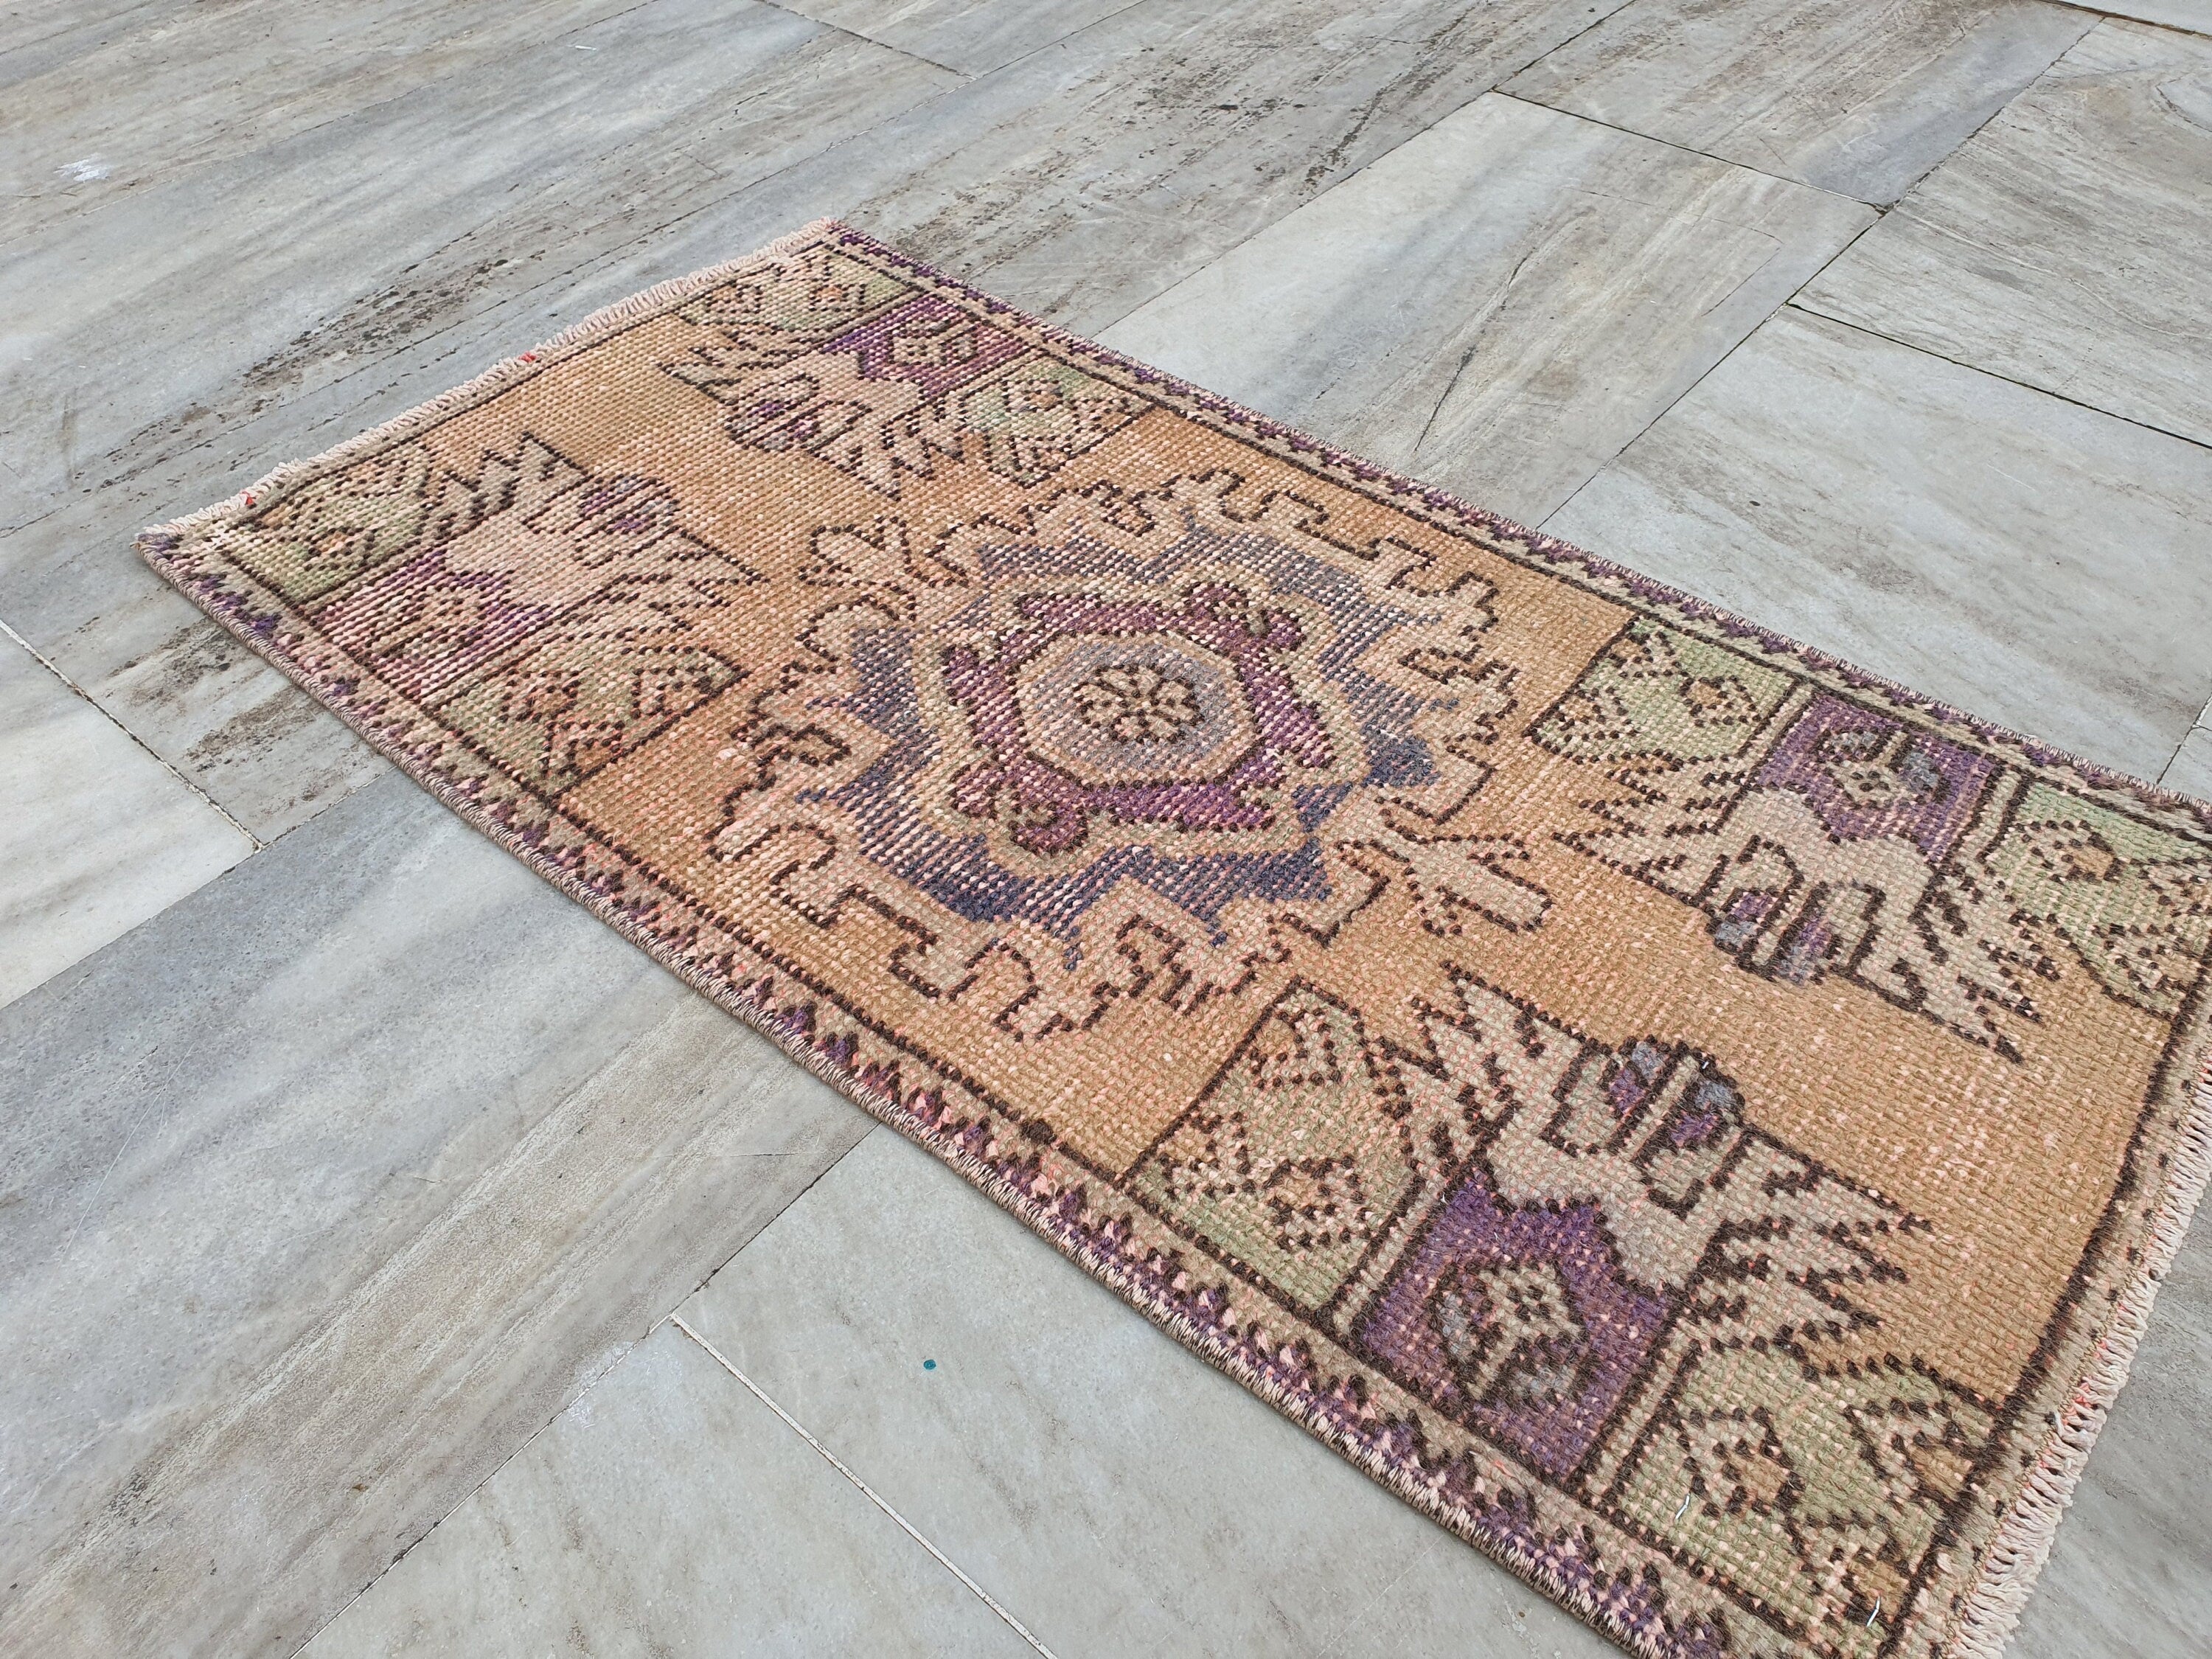 Small Turkish Rug, 2 ft 9 in x 1 ft 5 in Distressed Faded Vintage Mat